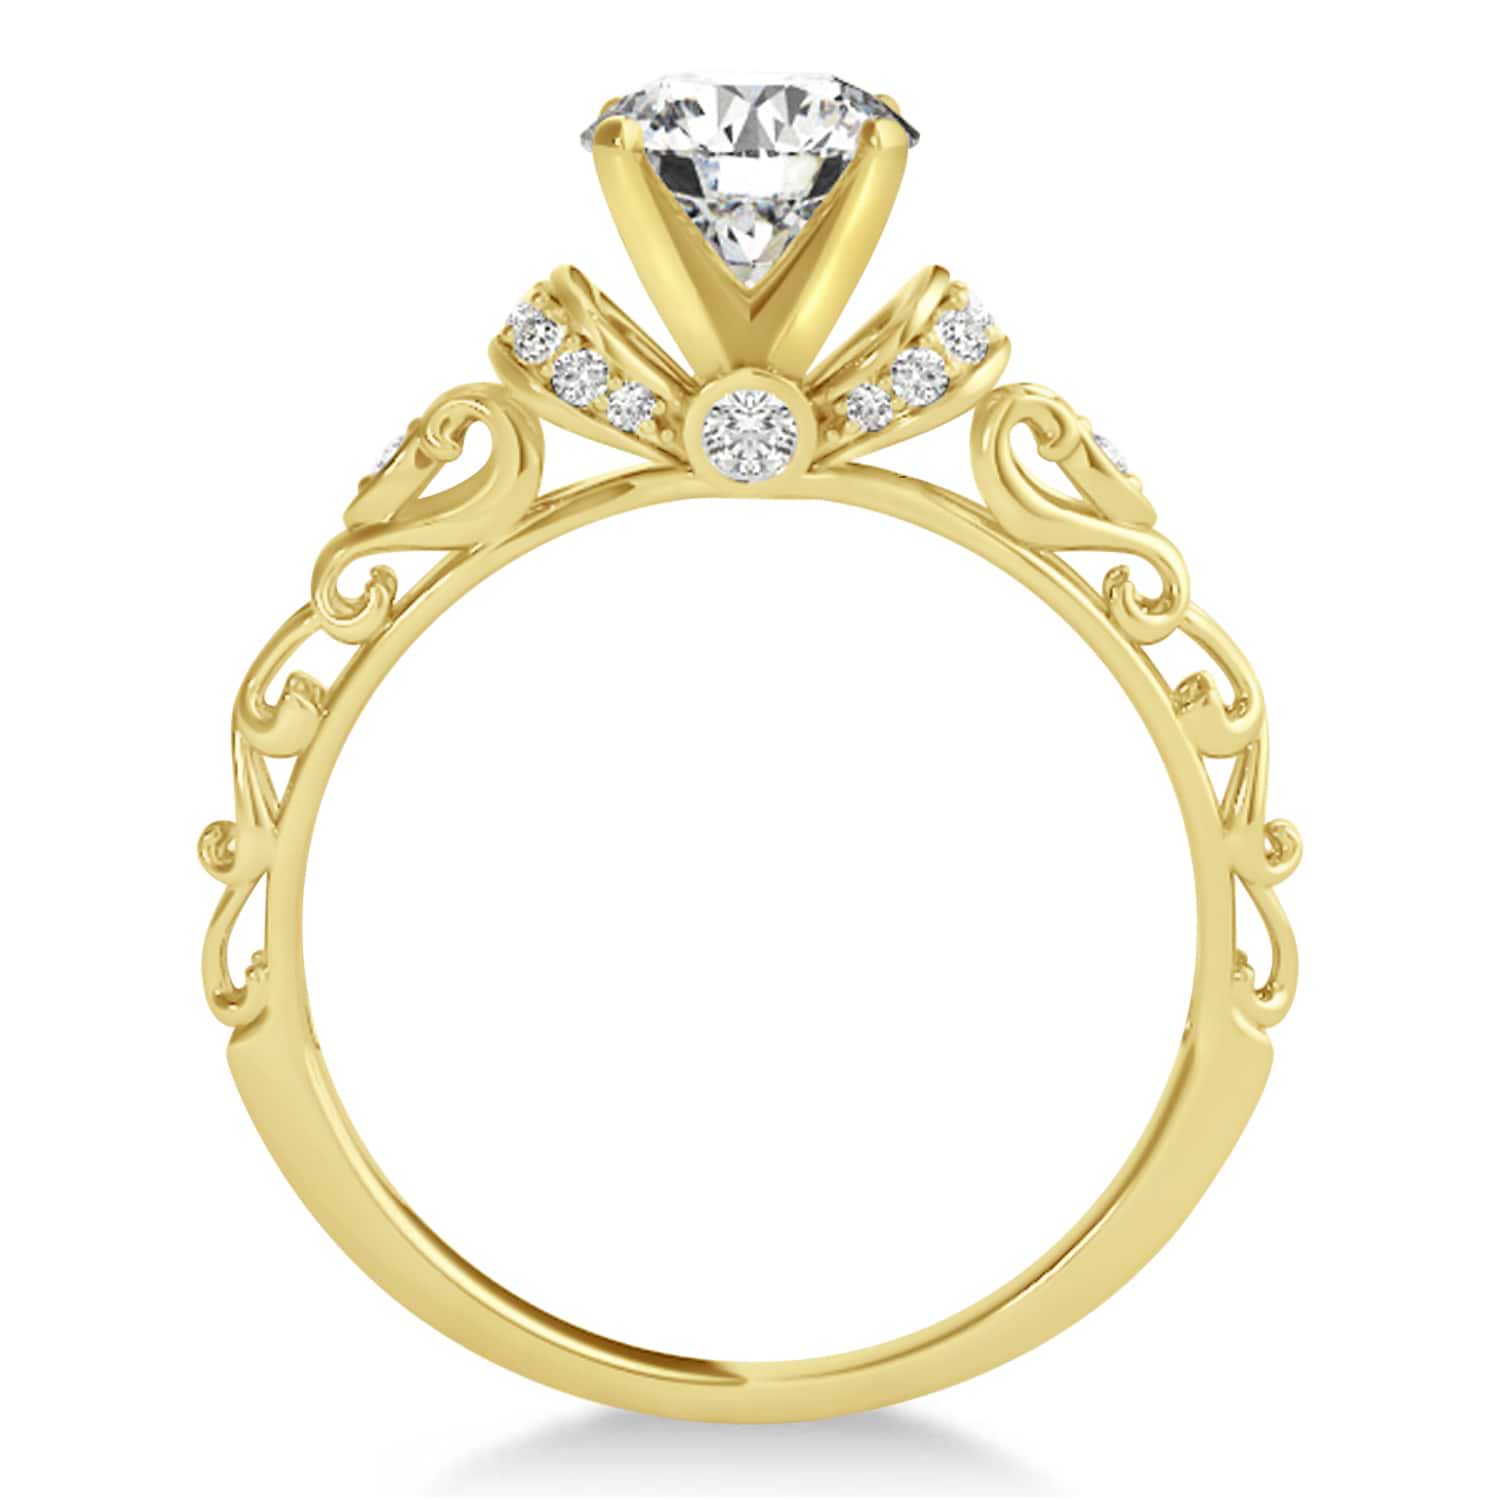 Lab Grown Diamond Antique Style Engagement Ring Setting 18k Yellow Gold (0.12ct)